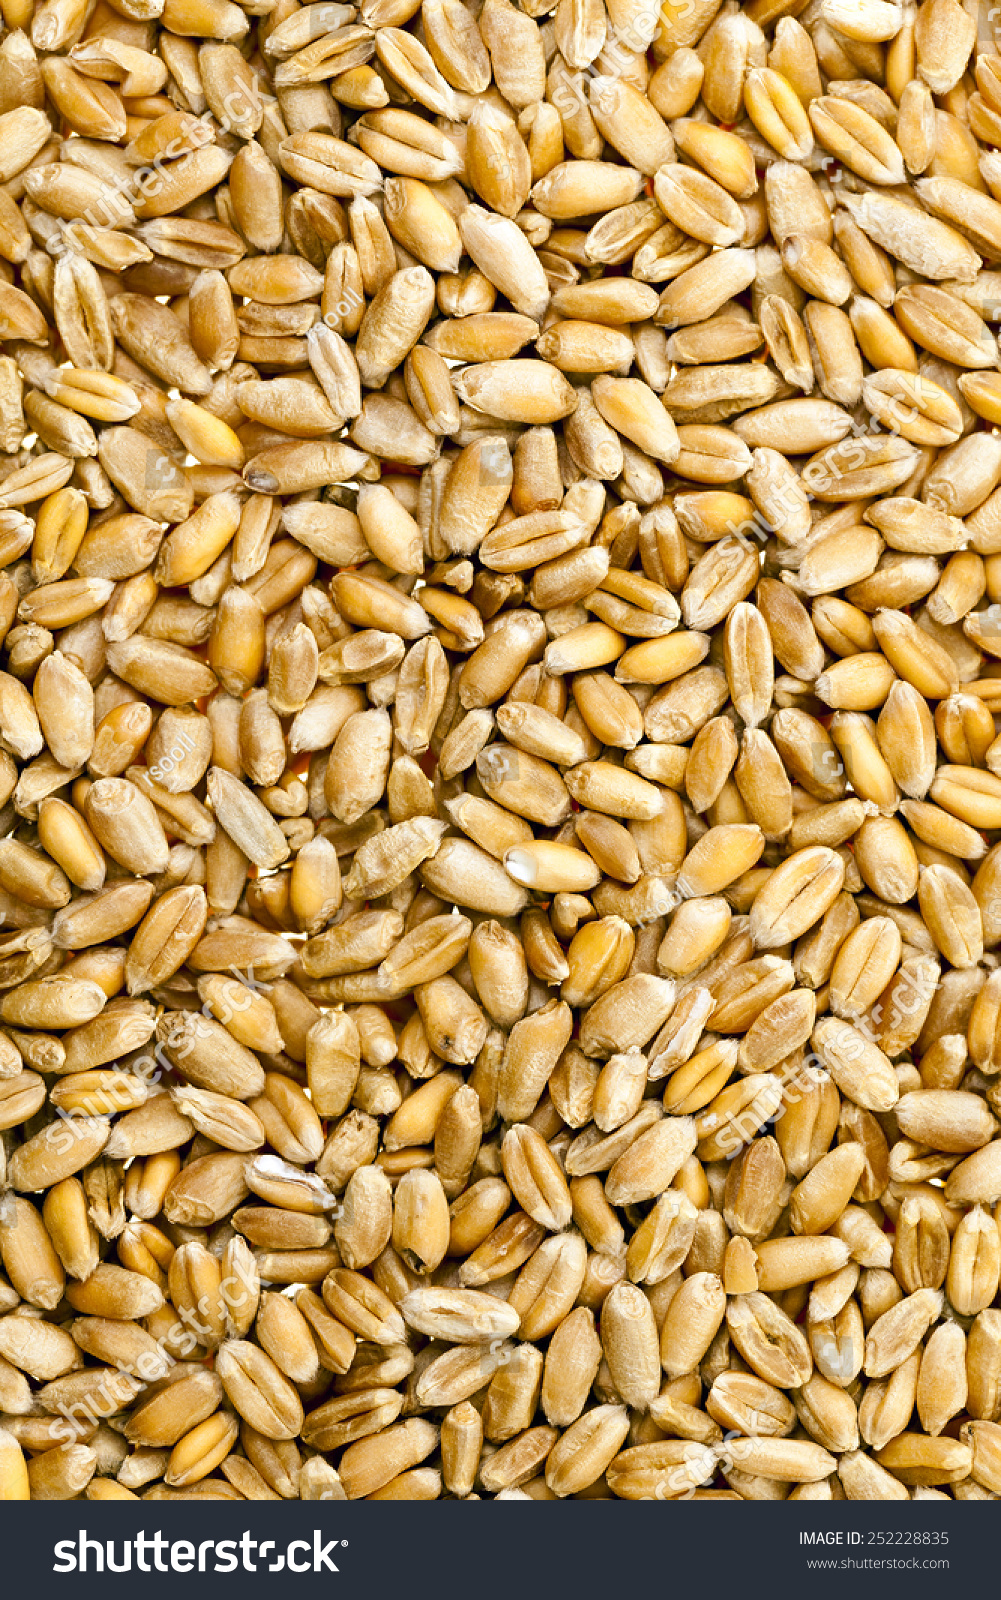   wheat grains photographed by a close up #252228835